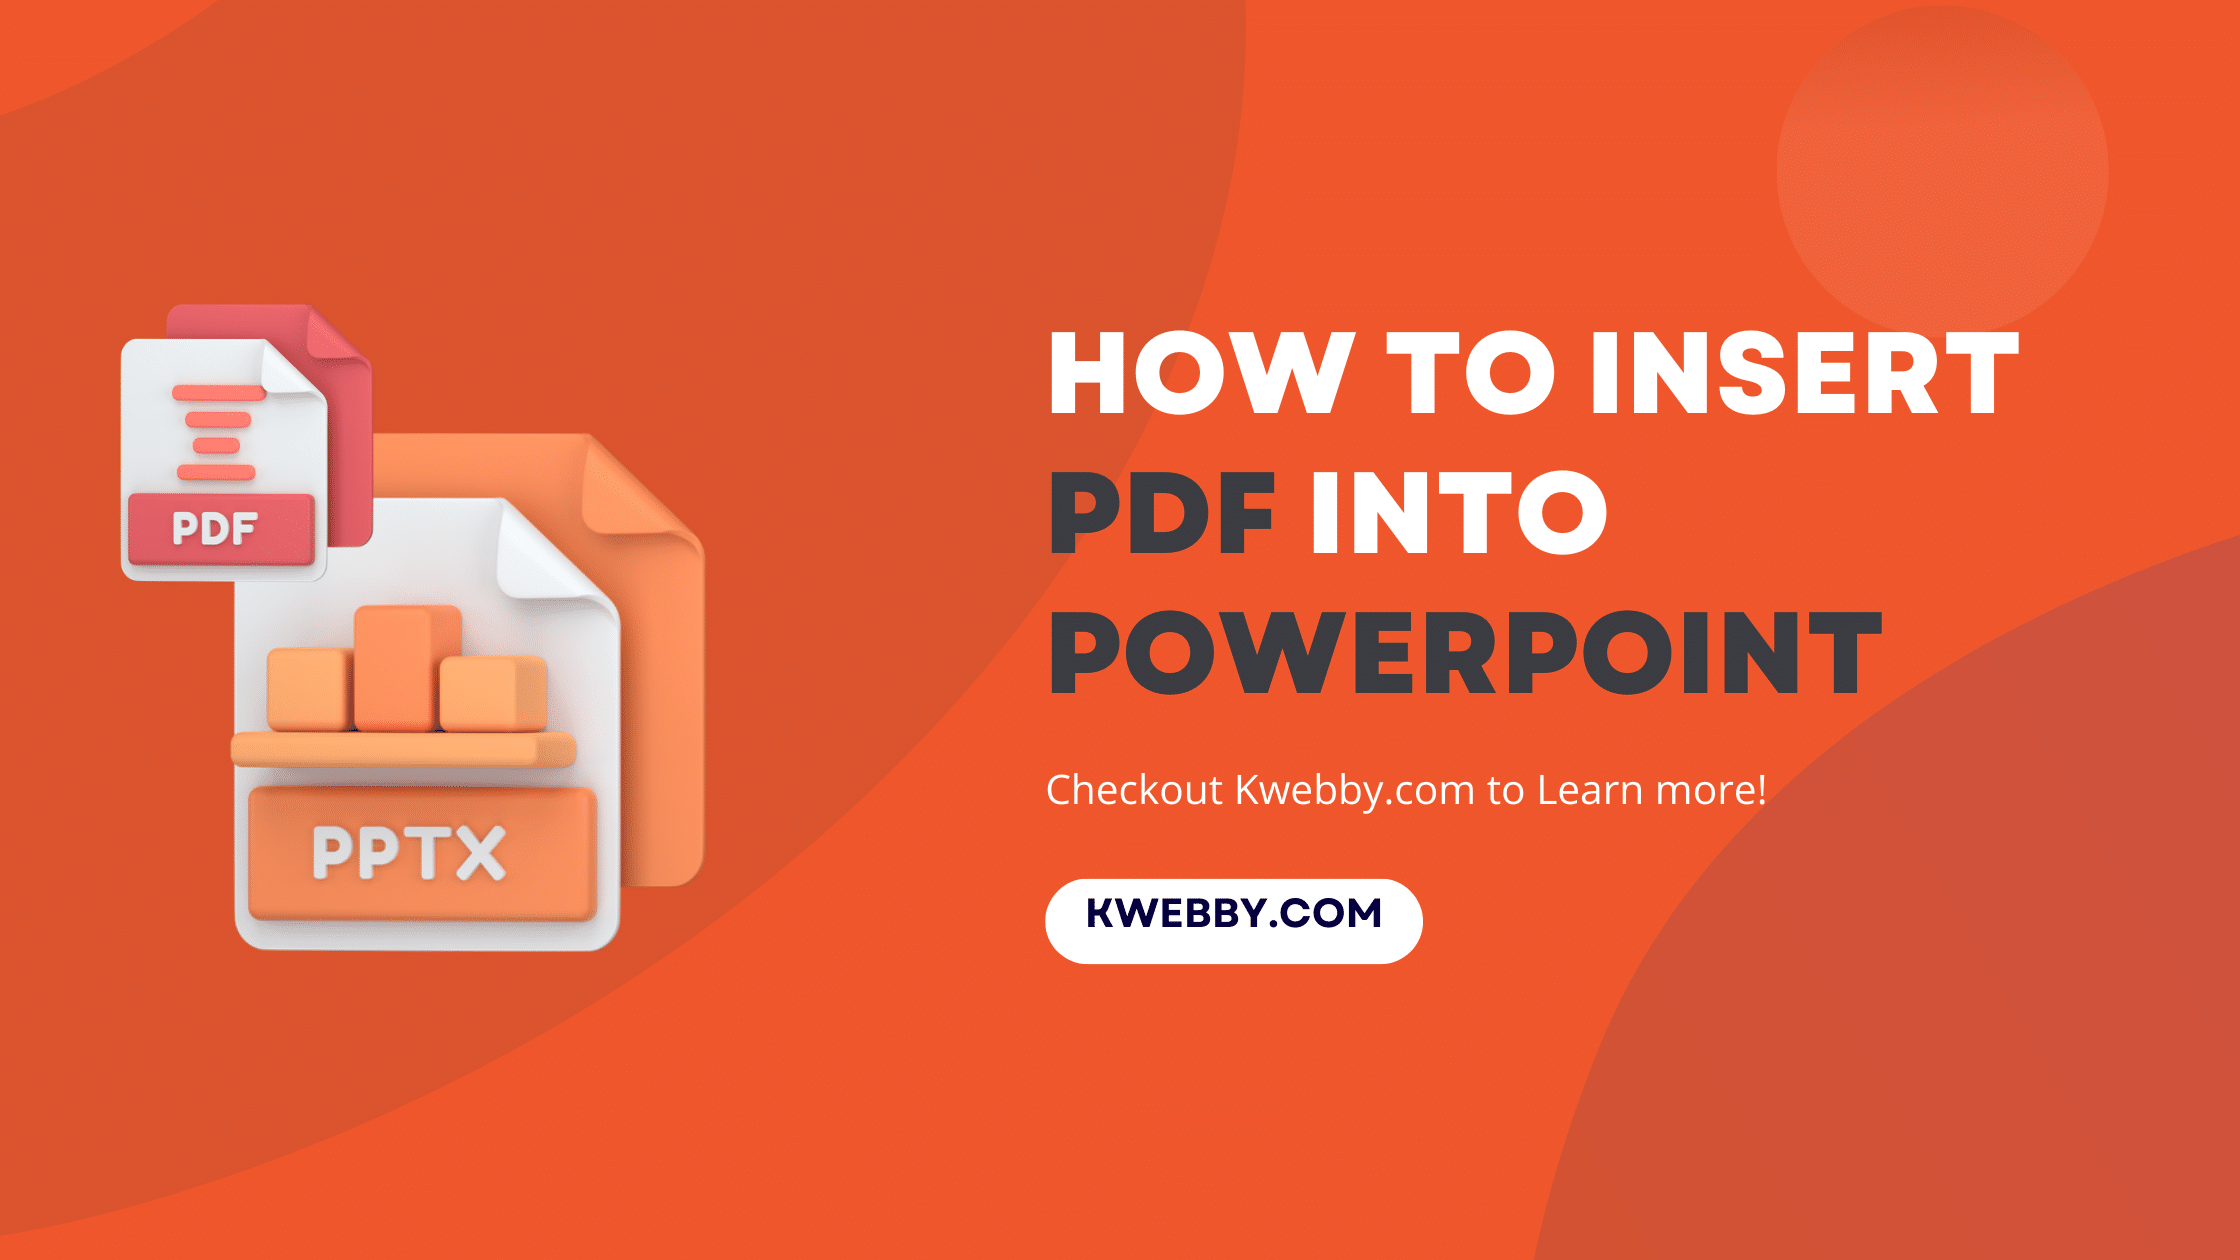 How to insert pdf into powerpoint